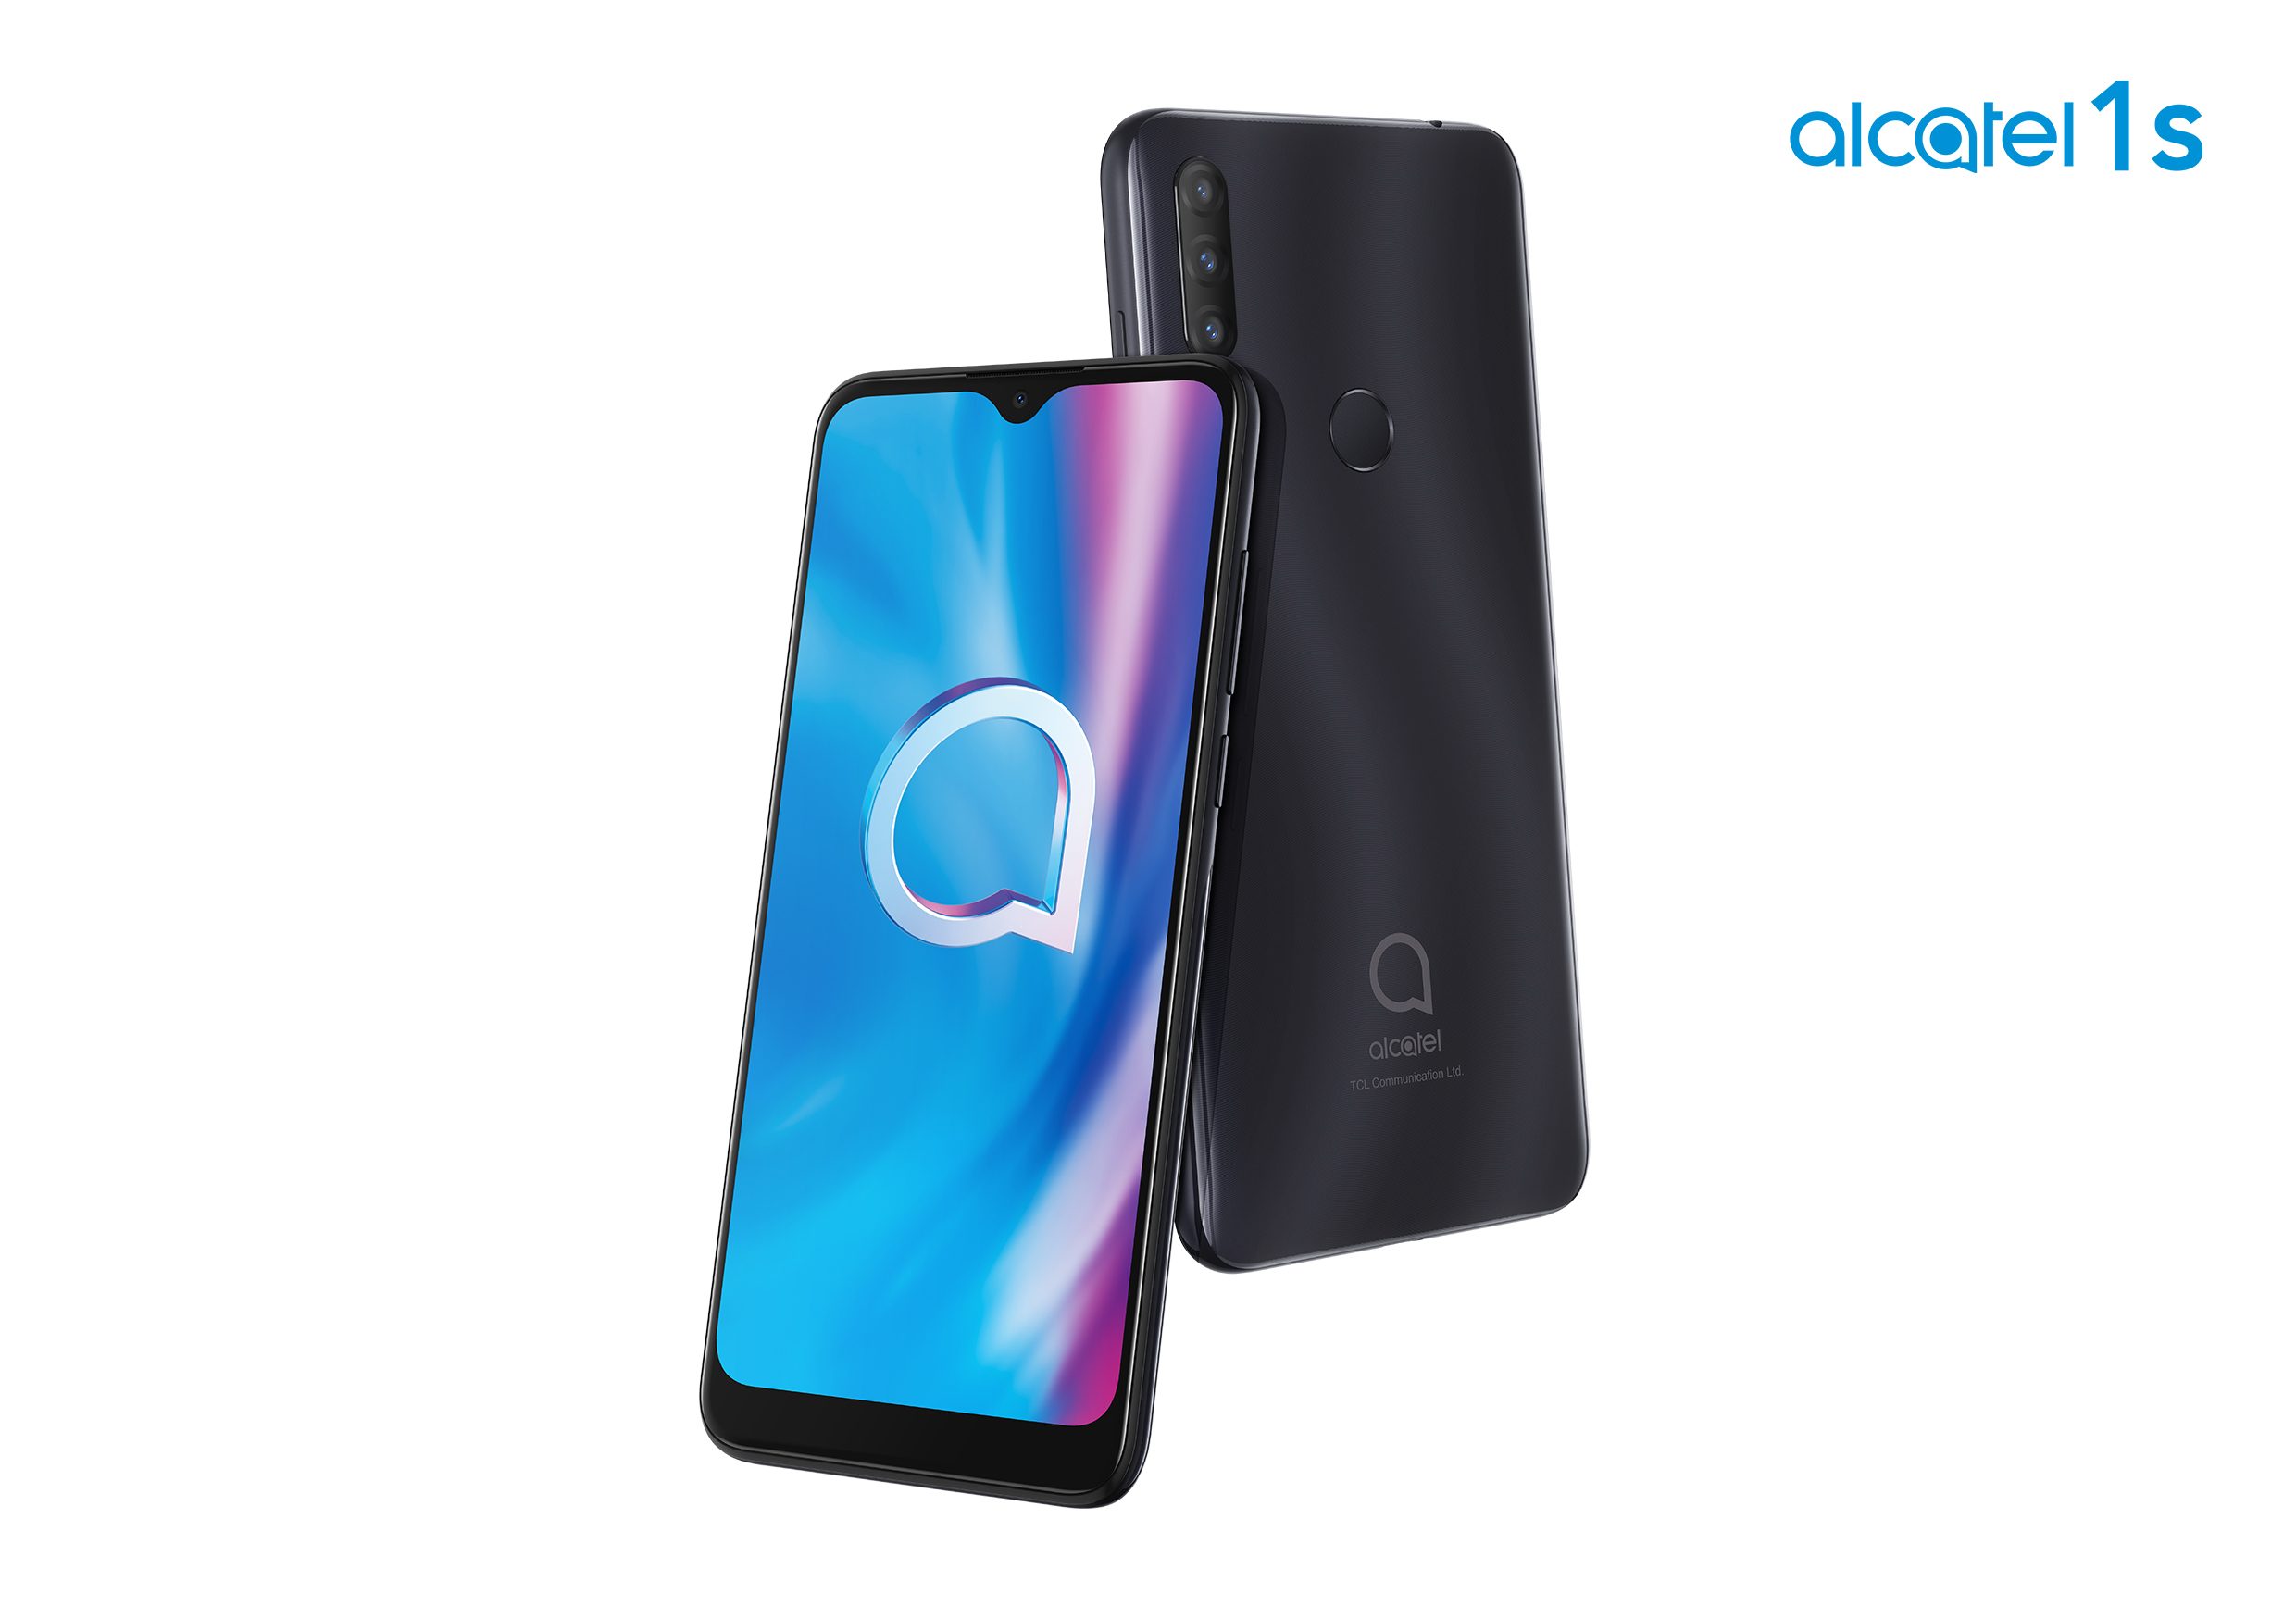 Overview of the Alcatel 1S (2020) smartphone with key features